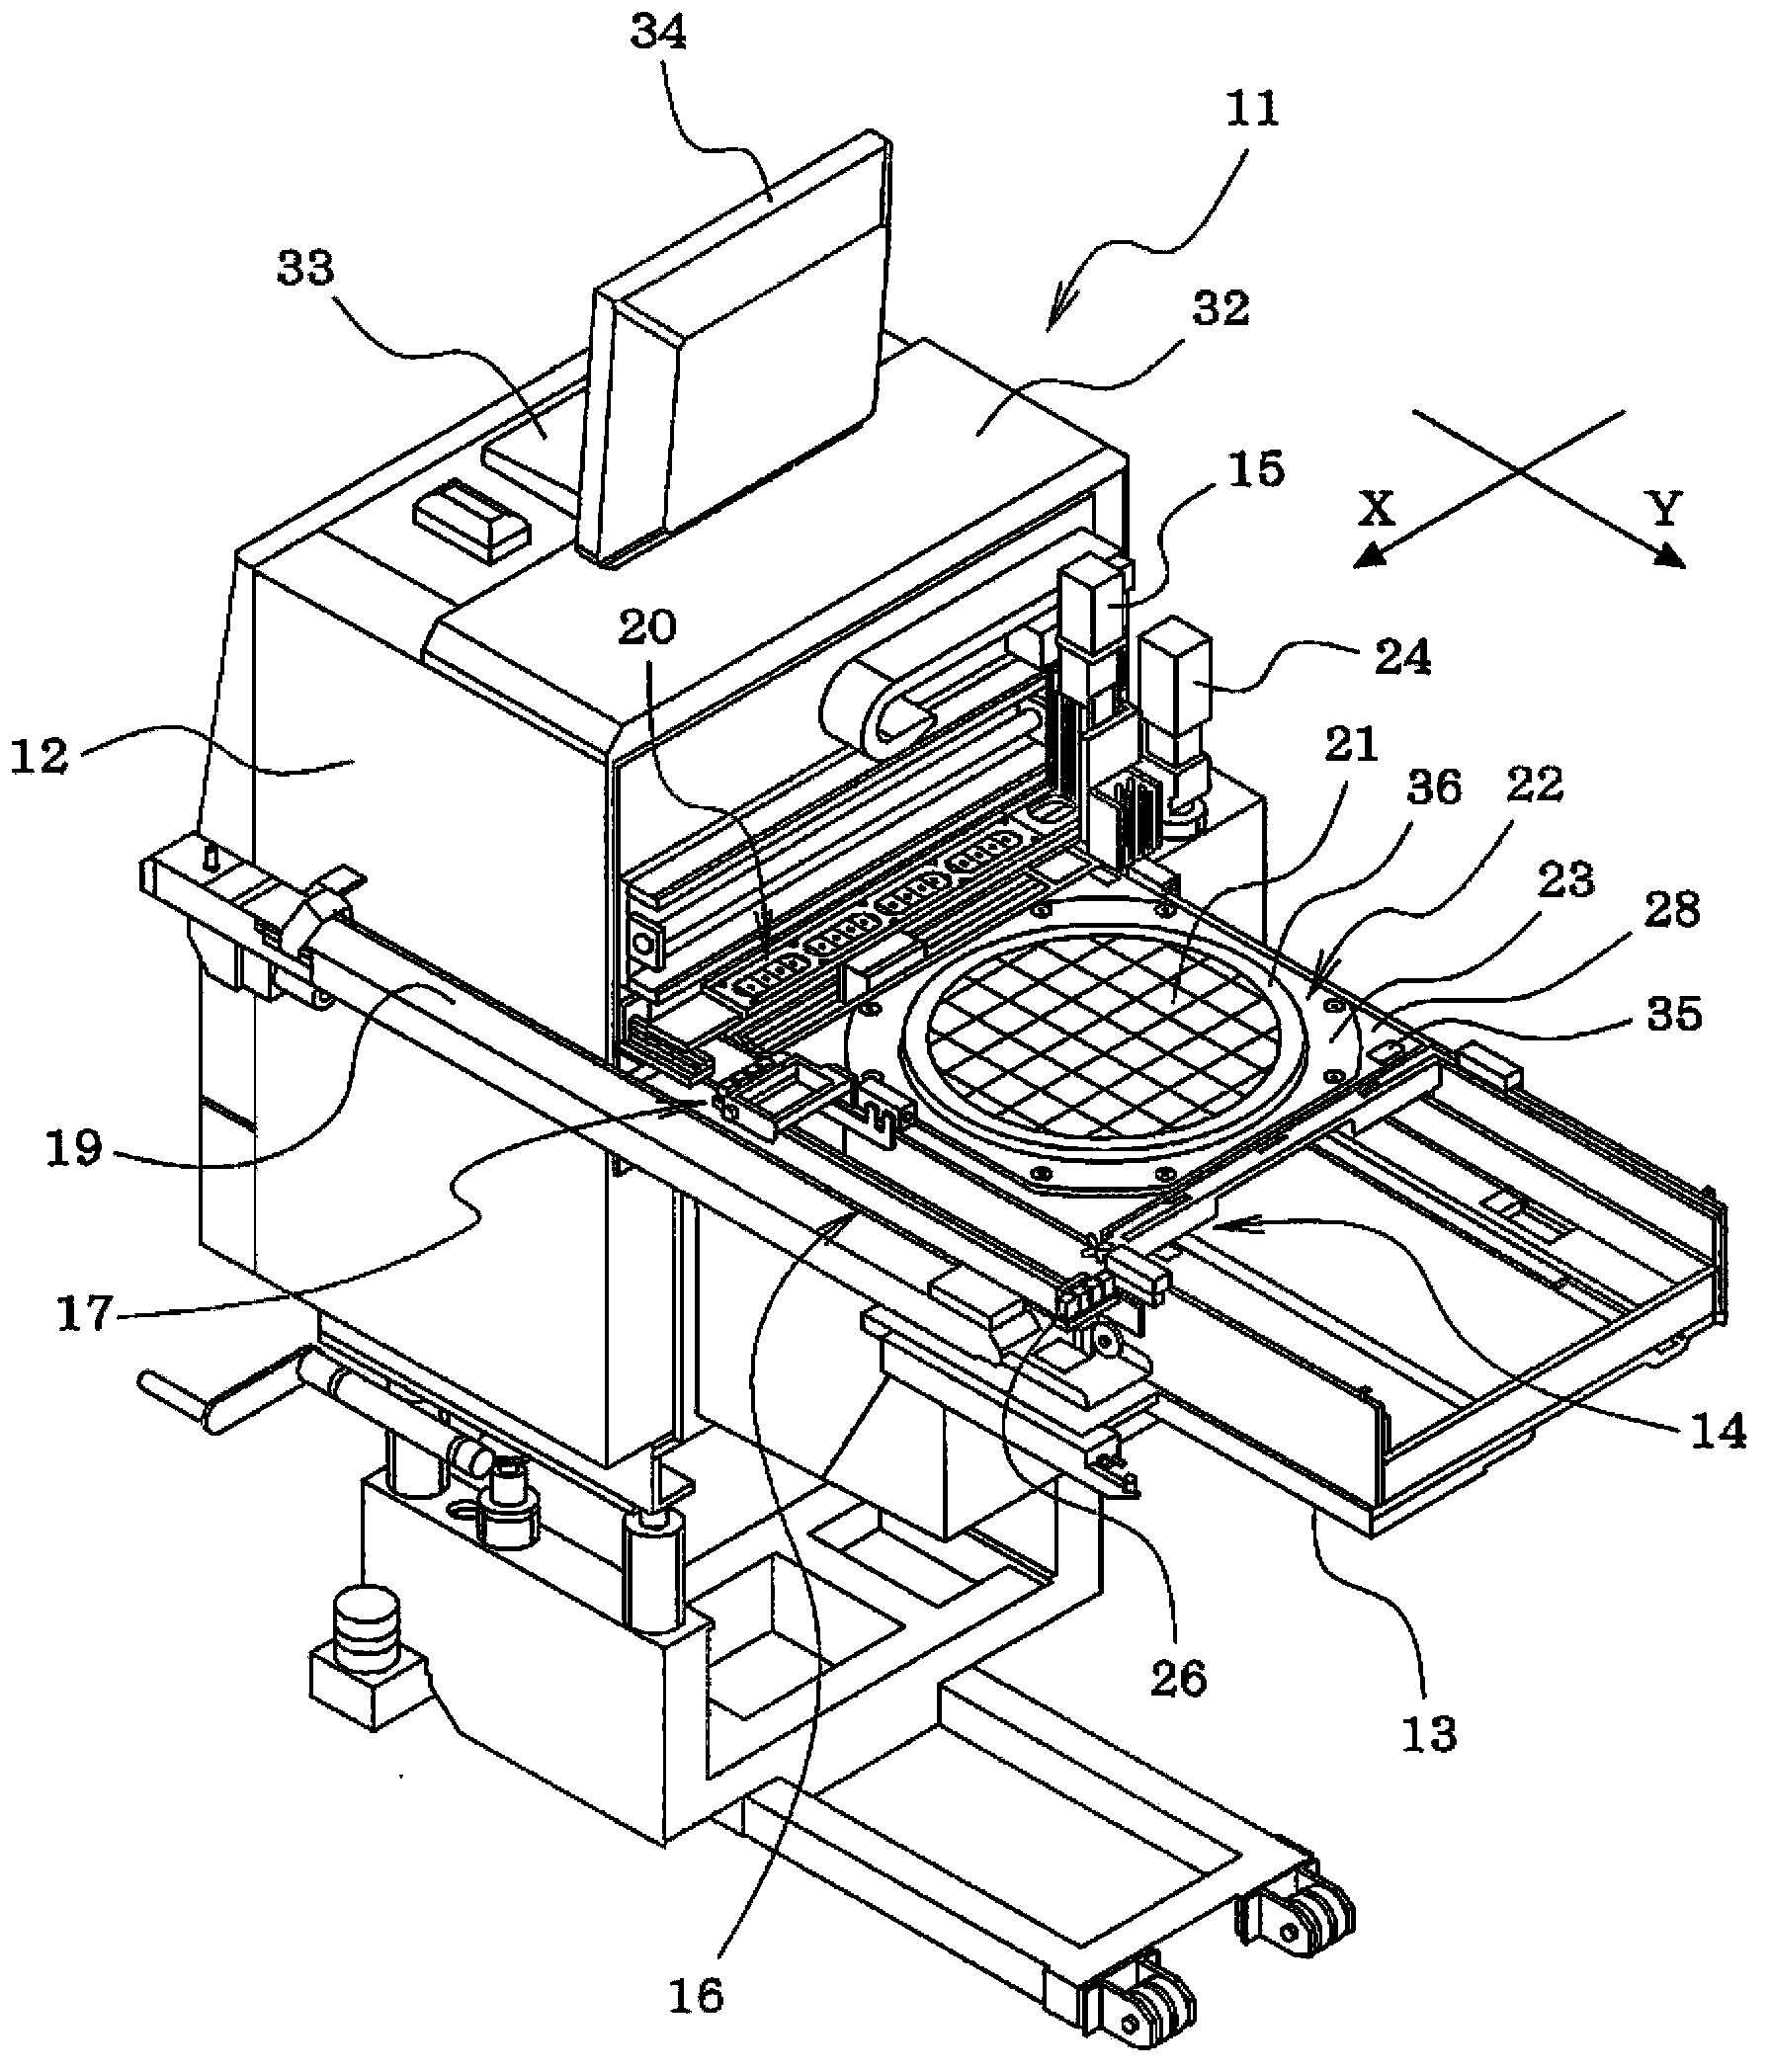 System for determining position of bare chip